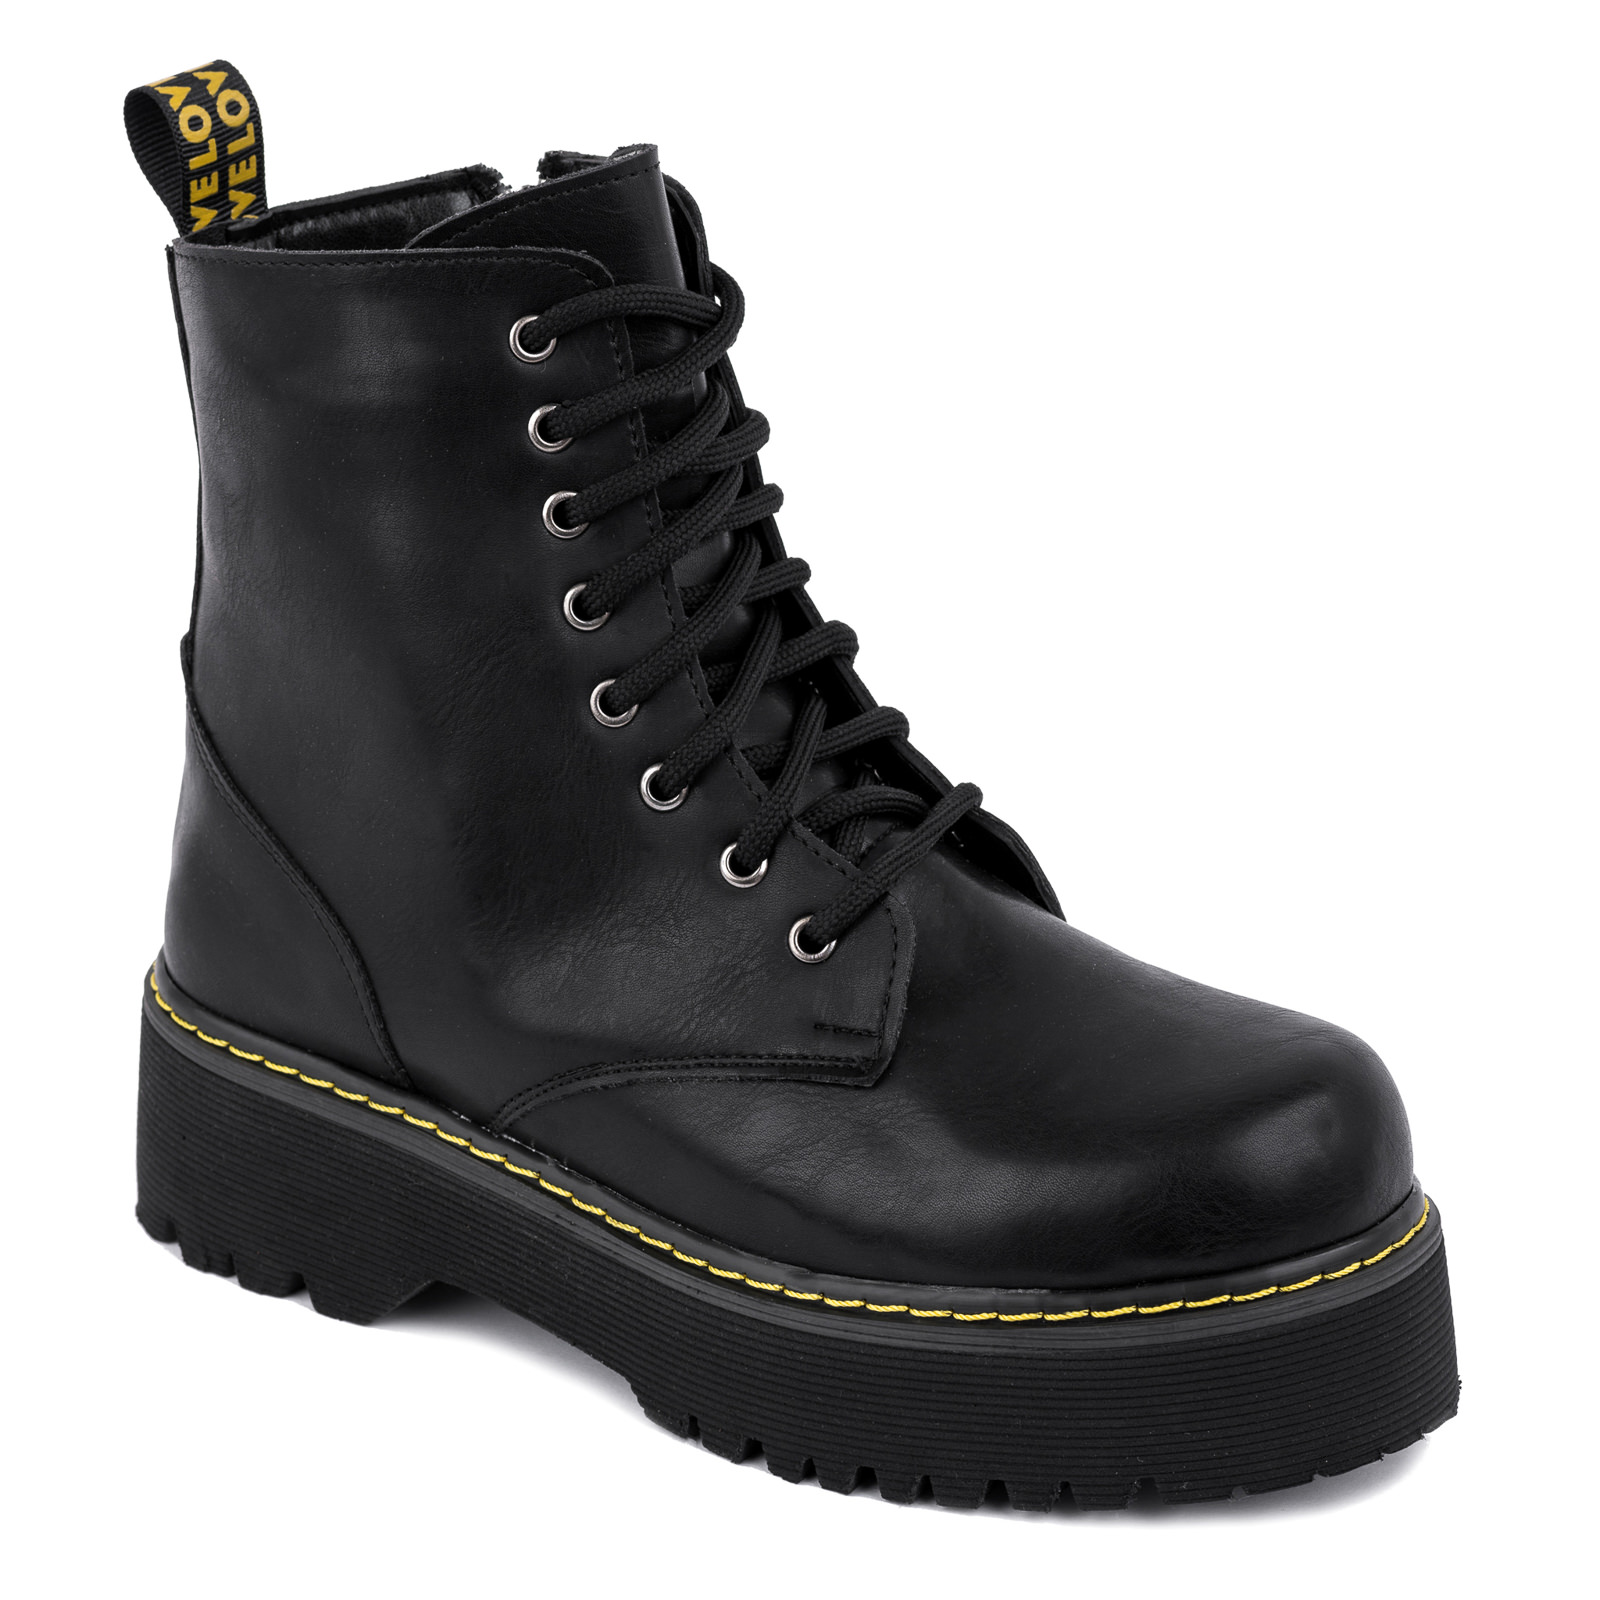 MARTIN BOOTS WITH YELLOW SEAM - BLACK